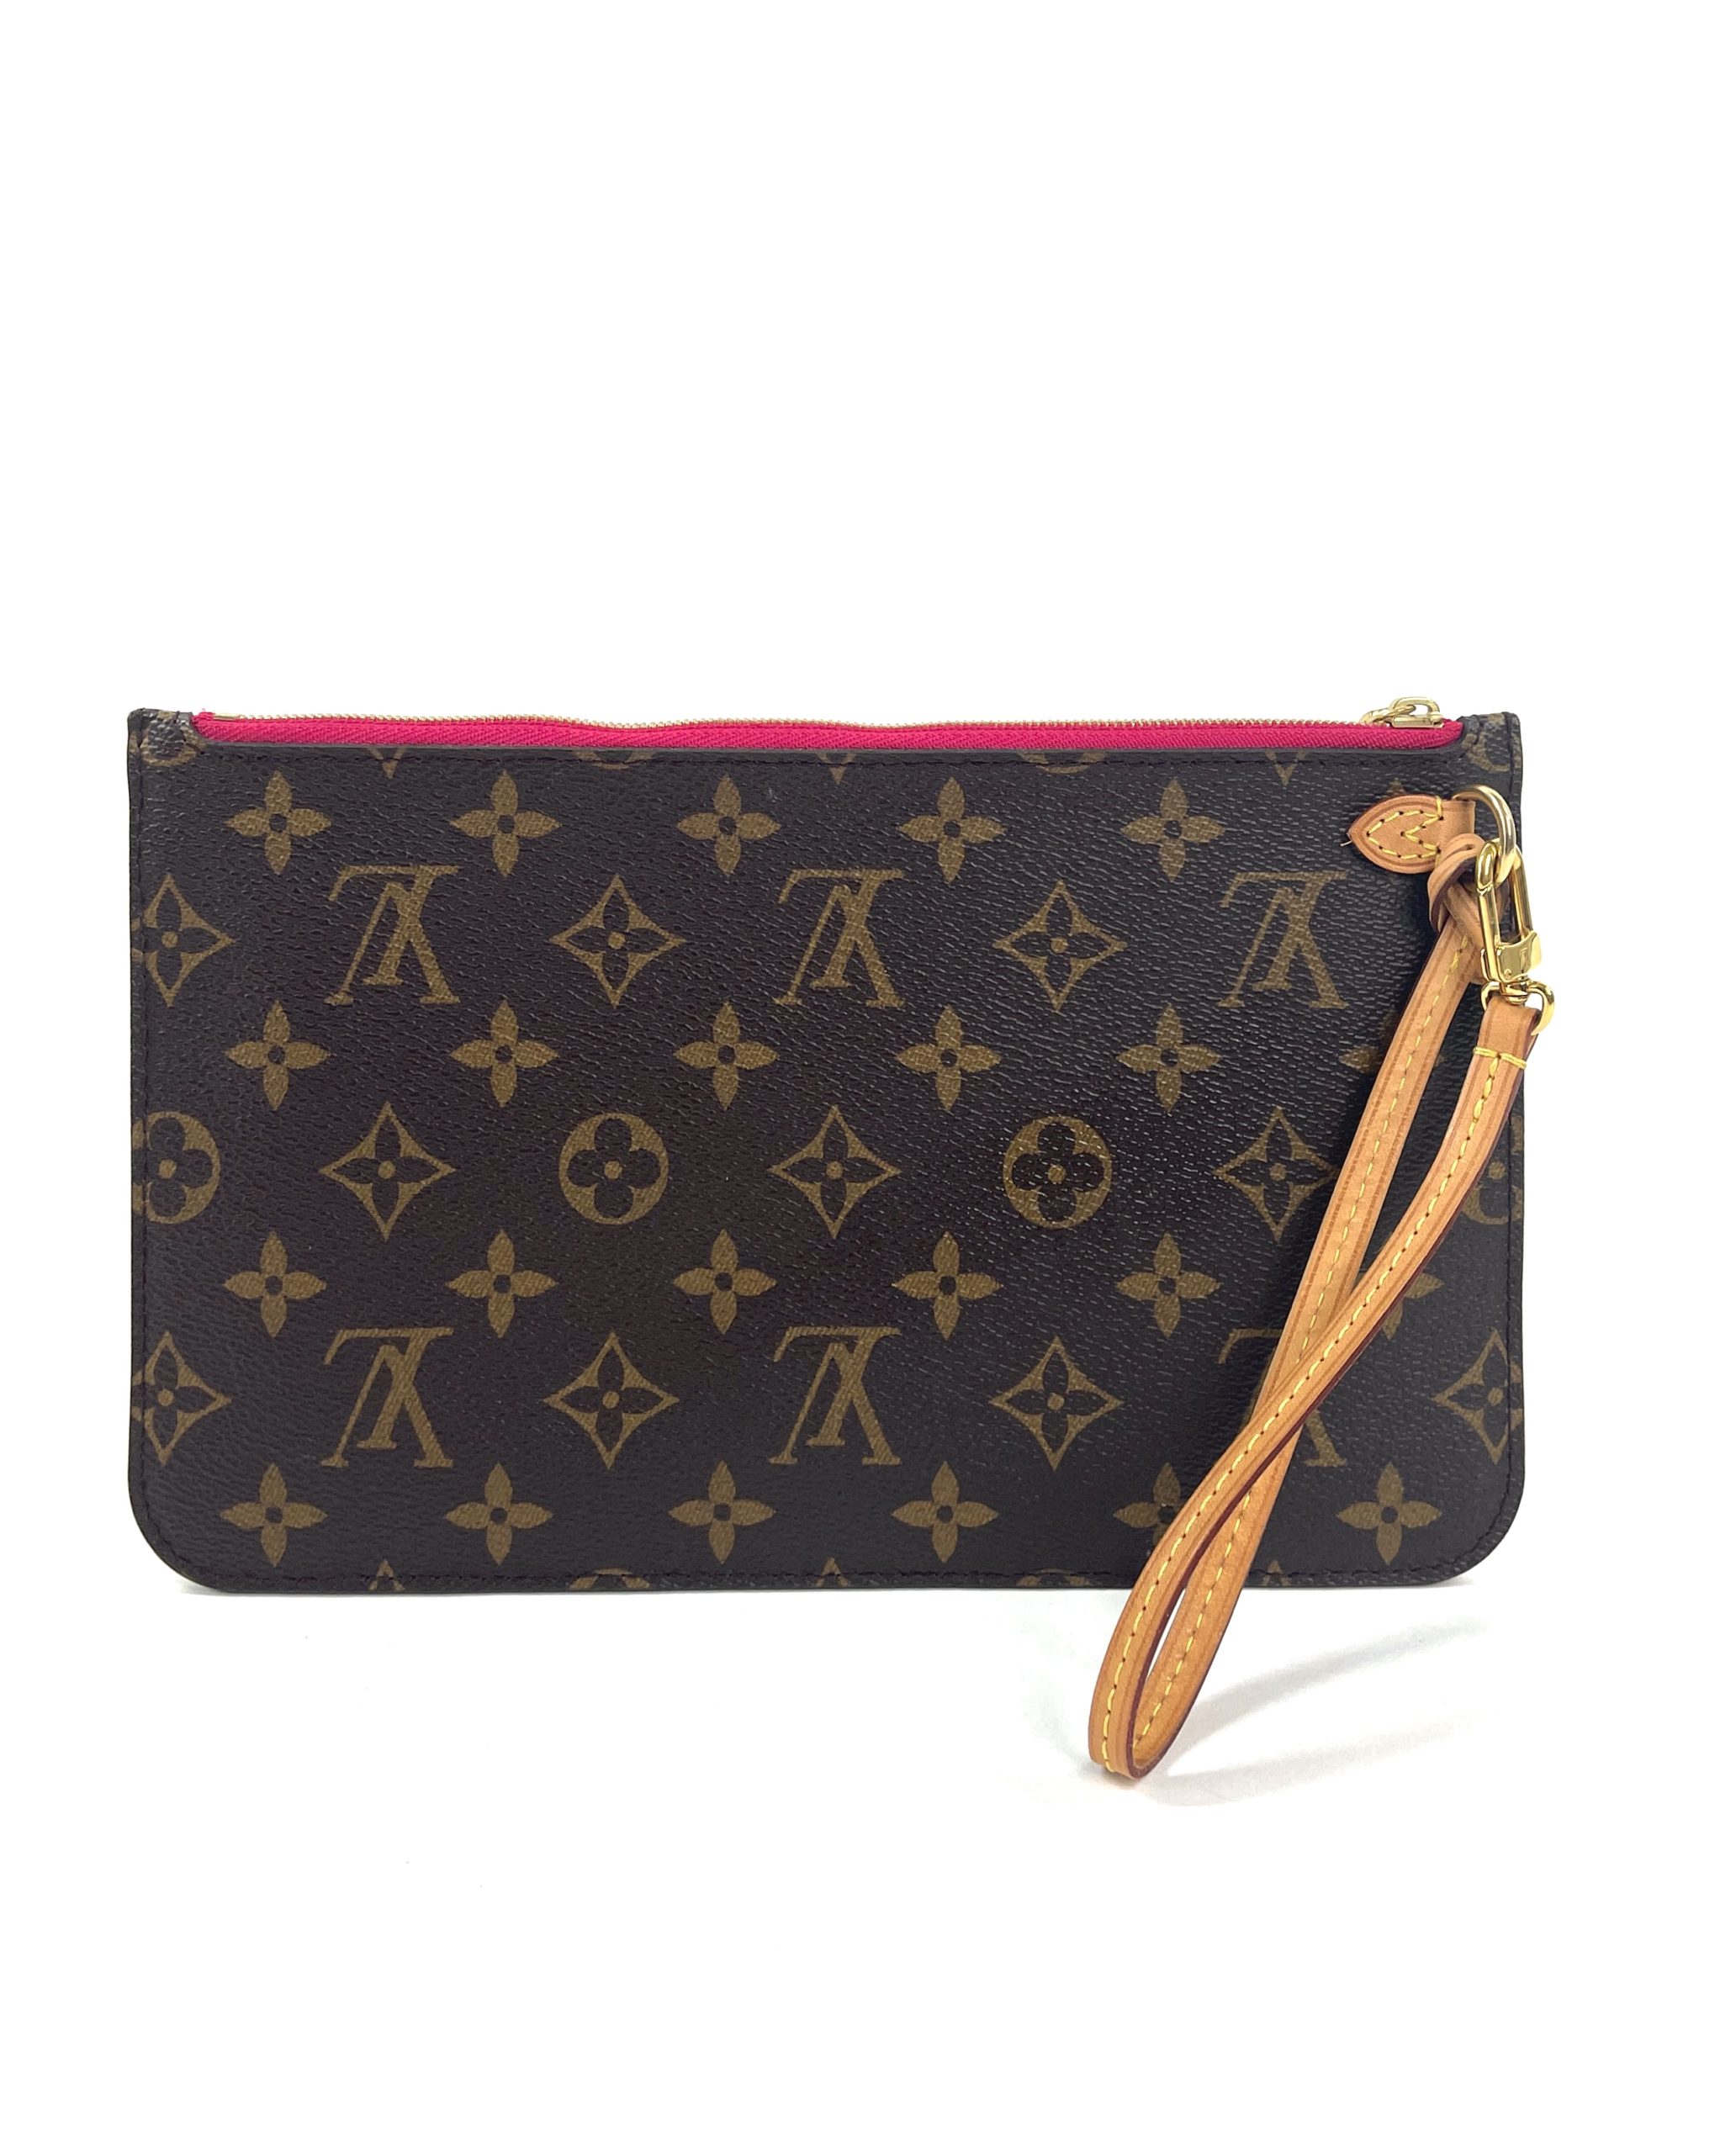 Louis Vuitton Zip Pochette Pouch Wrislet from Neverfull MM in Monogram- SOLD